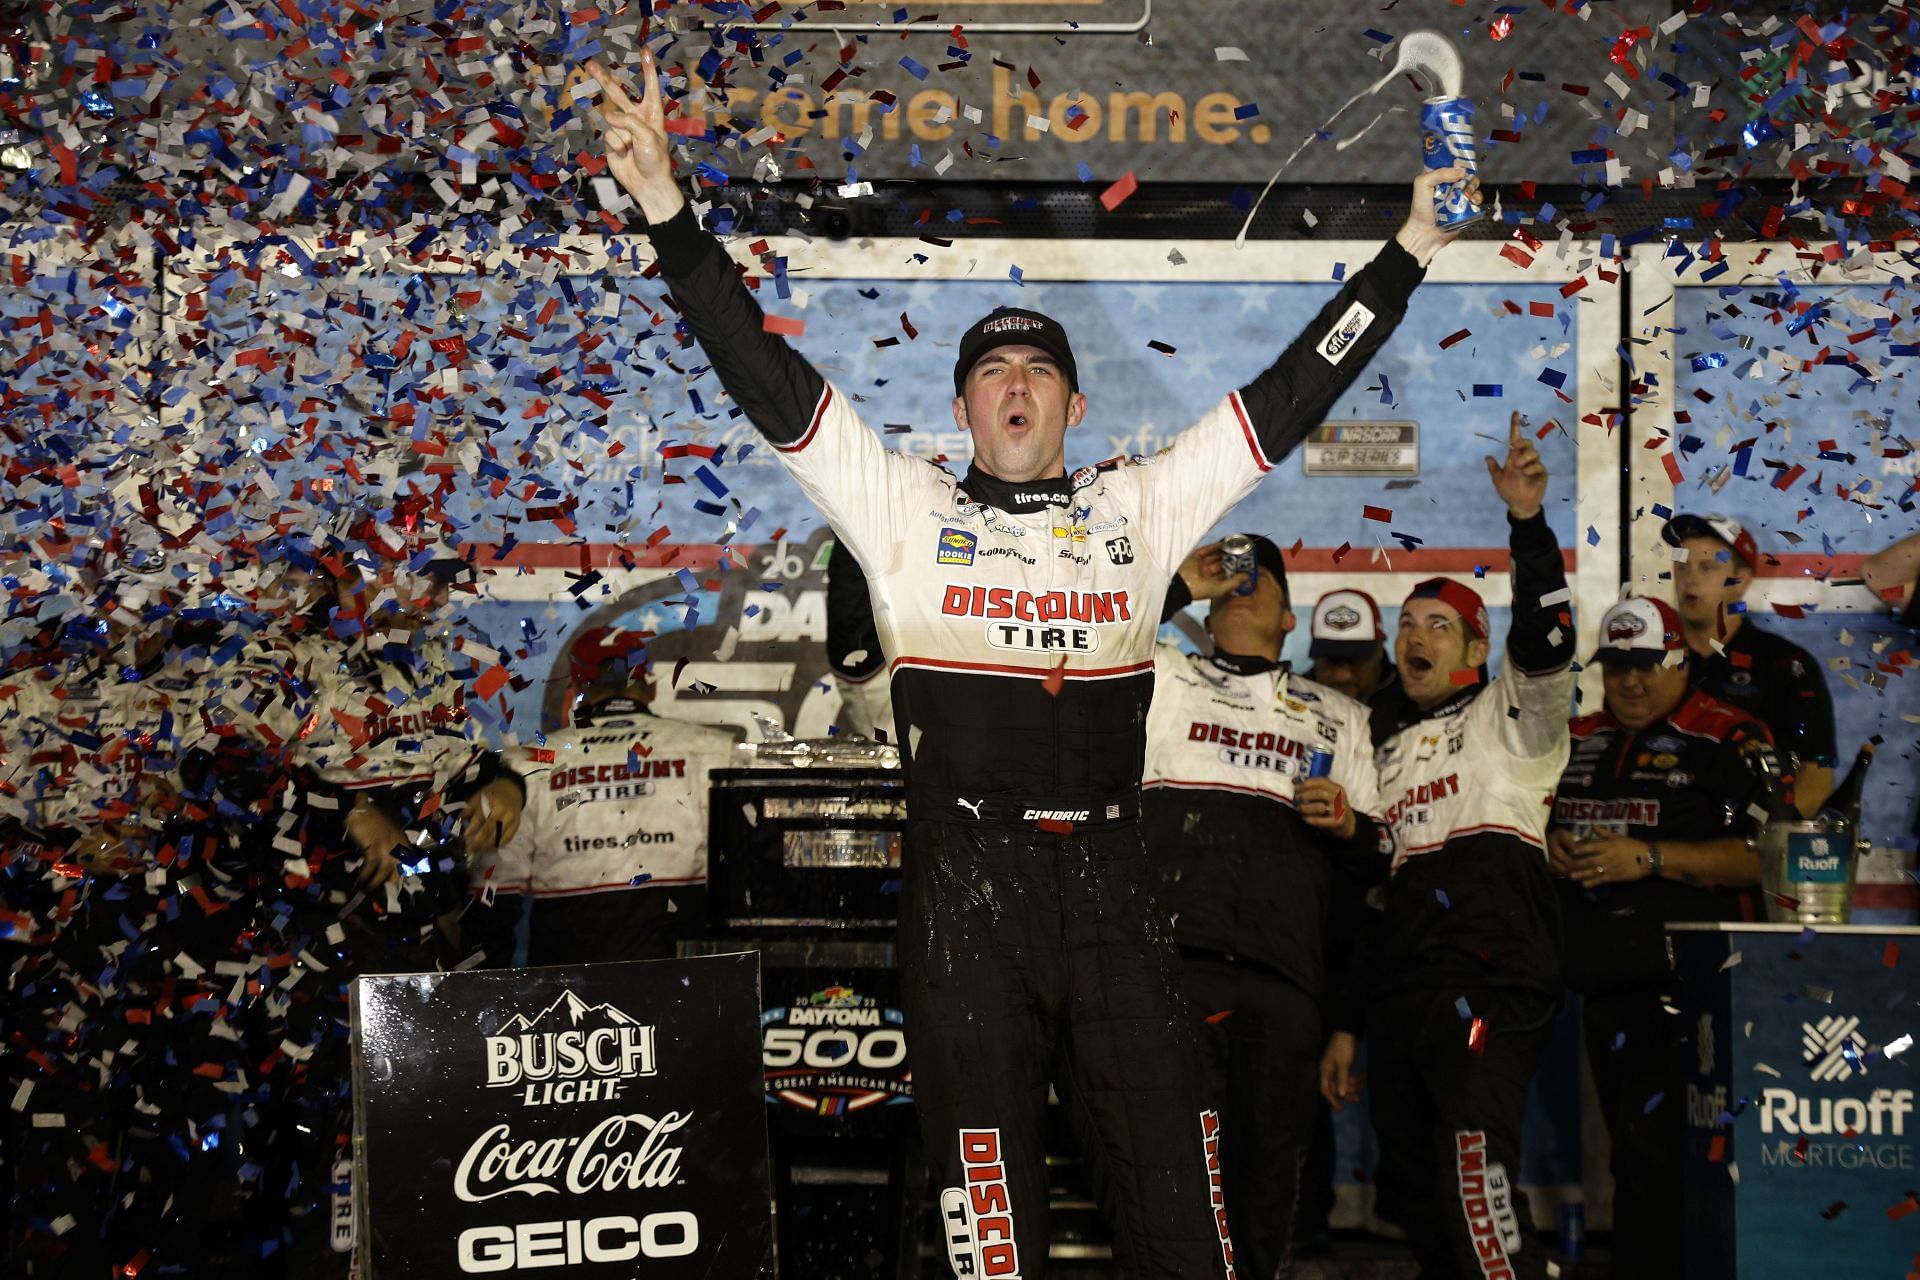 Austin Cindric celebrates in the Ruoff Mortgage victory lane after winning the 2022 NASCAR Cup Series 64th Annual Daytona 500 at Daytona International Speedway in Florida (Photo by Chris Graythen/Getty Images)